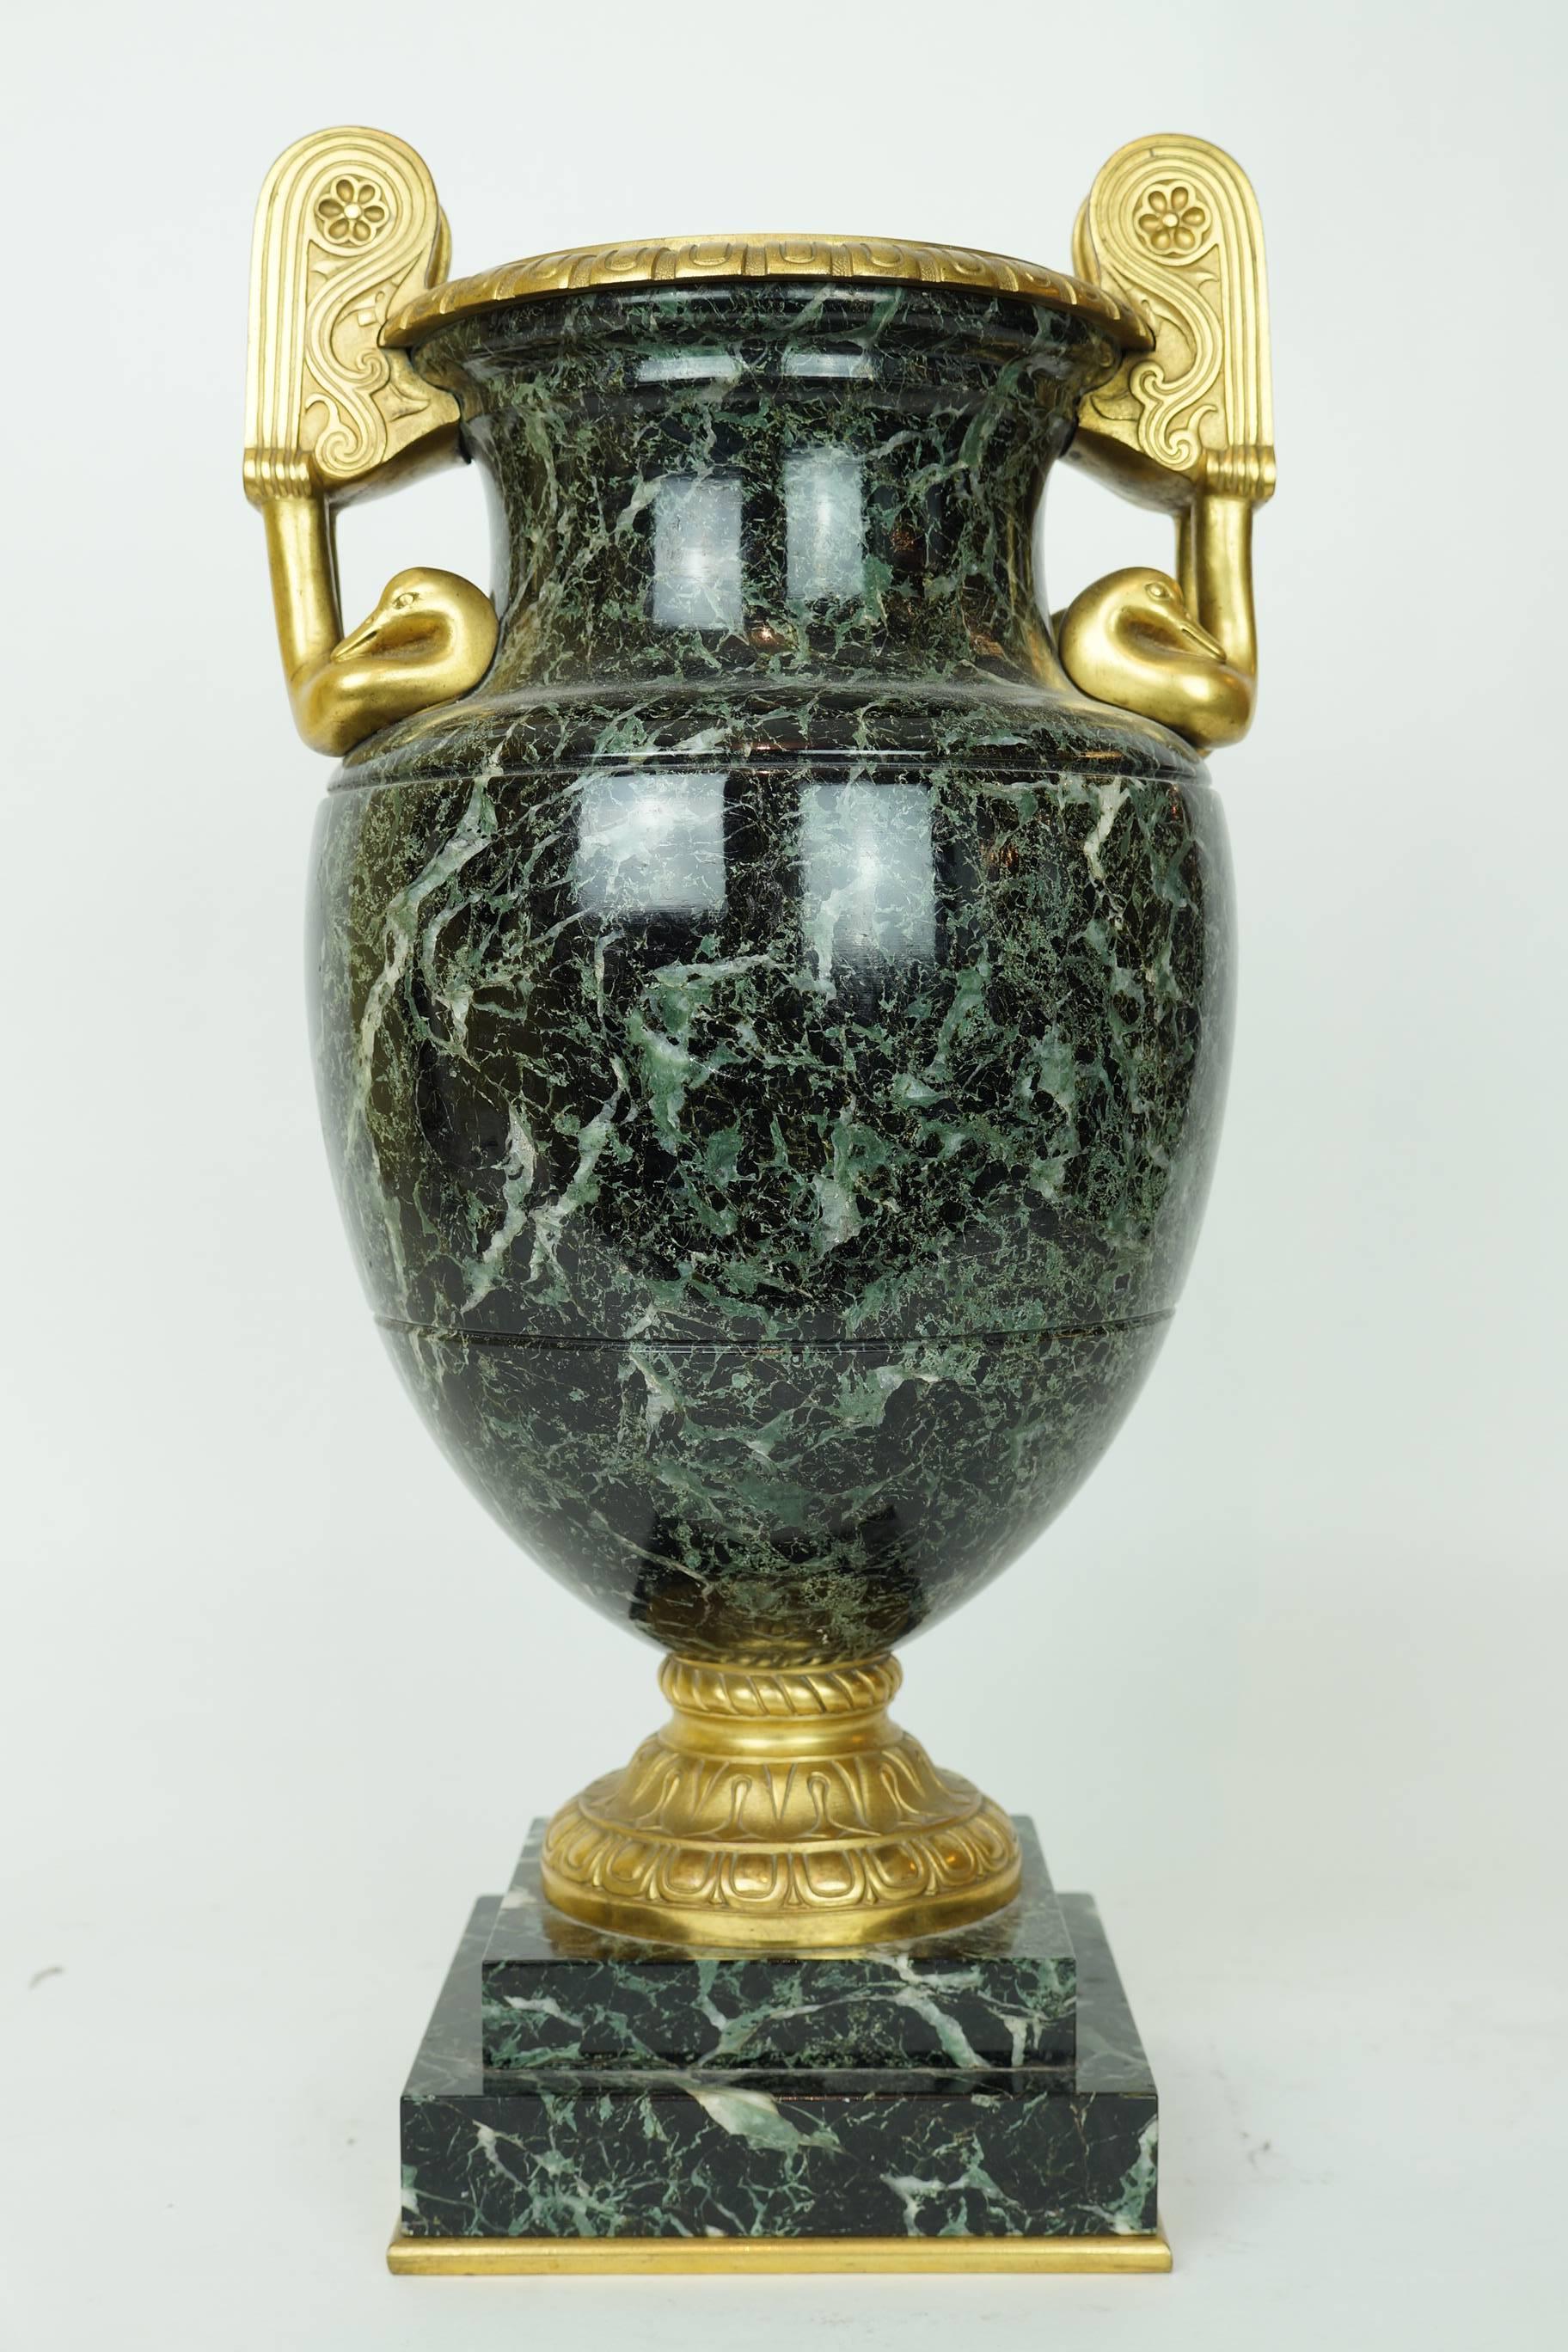 Pair of neoclassical marble and bronze urns with bronze swan handles.
Stock Number: DA148